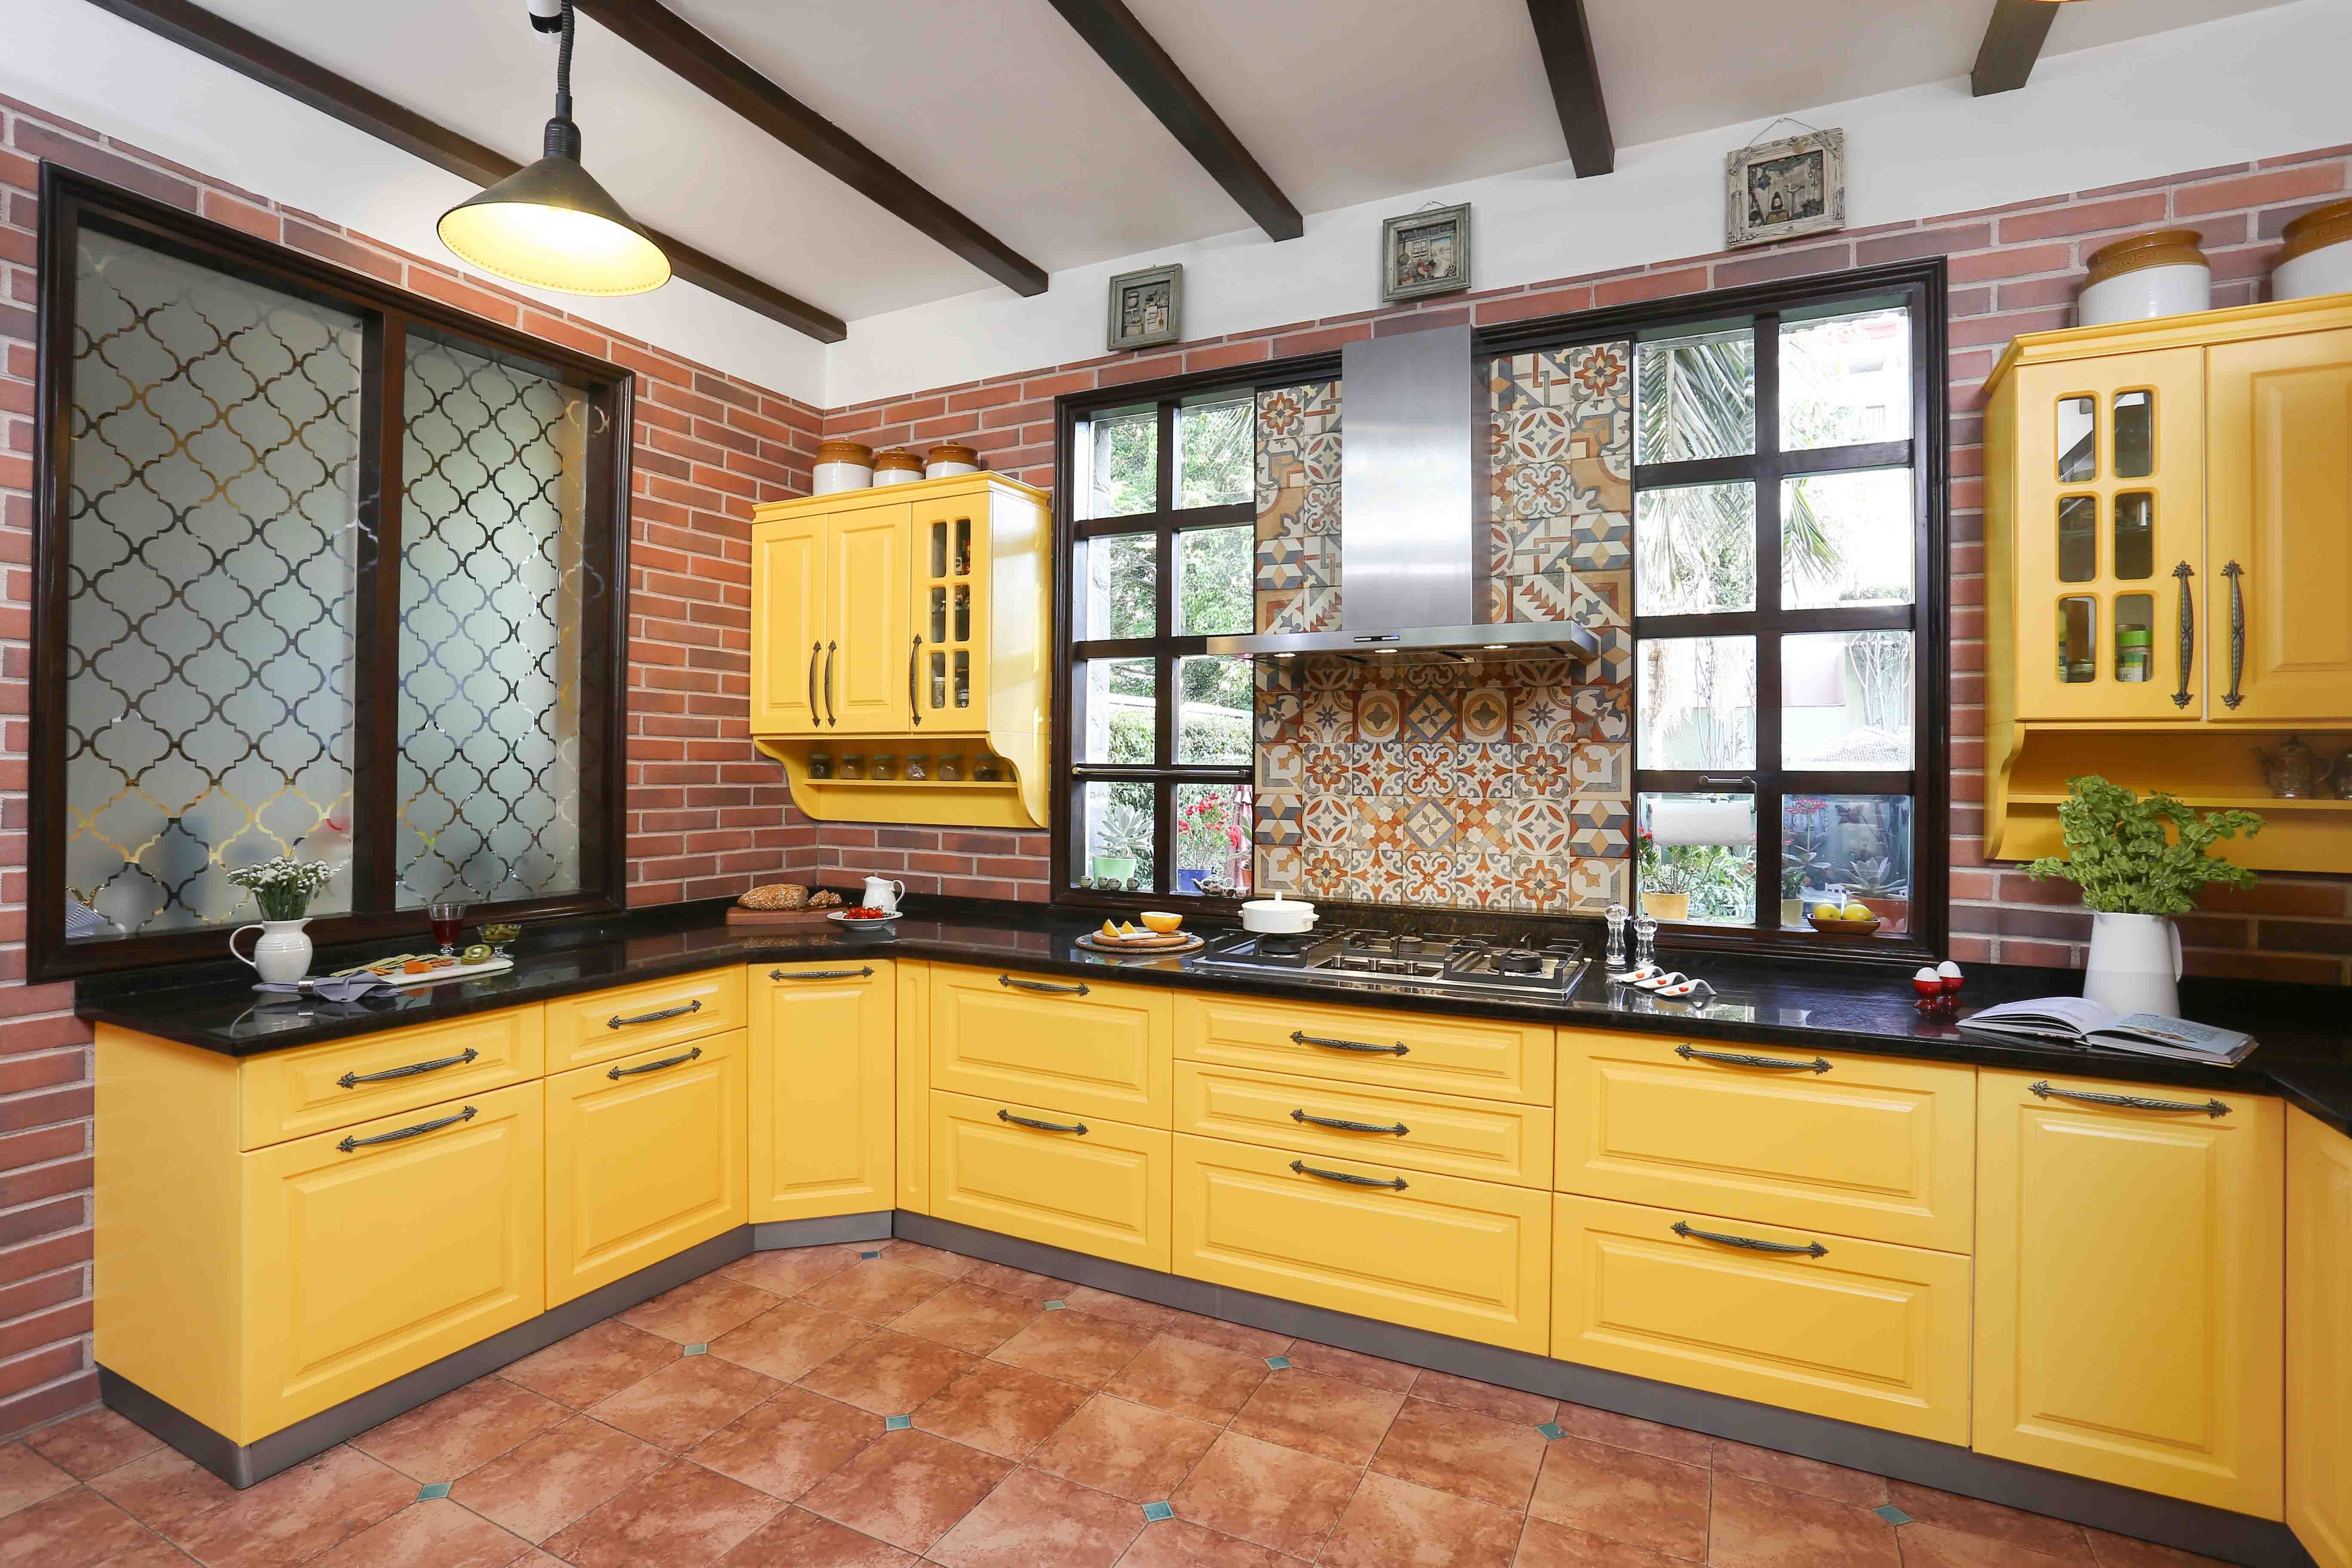 Transitional U-Shaped Kitchen Cabinet Design With Yellow Cabinets And Red Brick Accent Wall